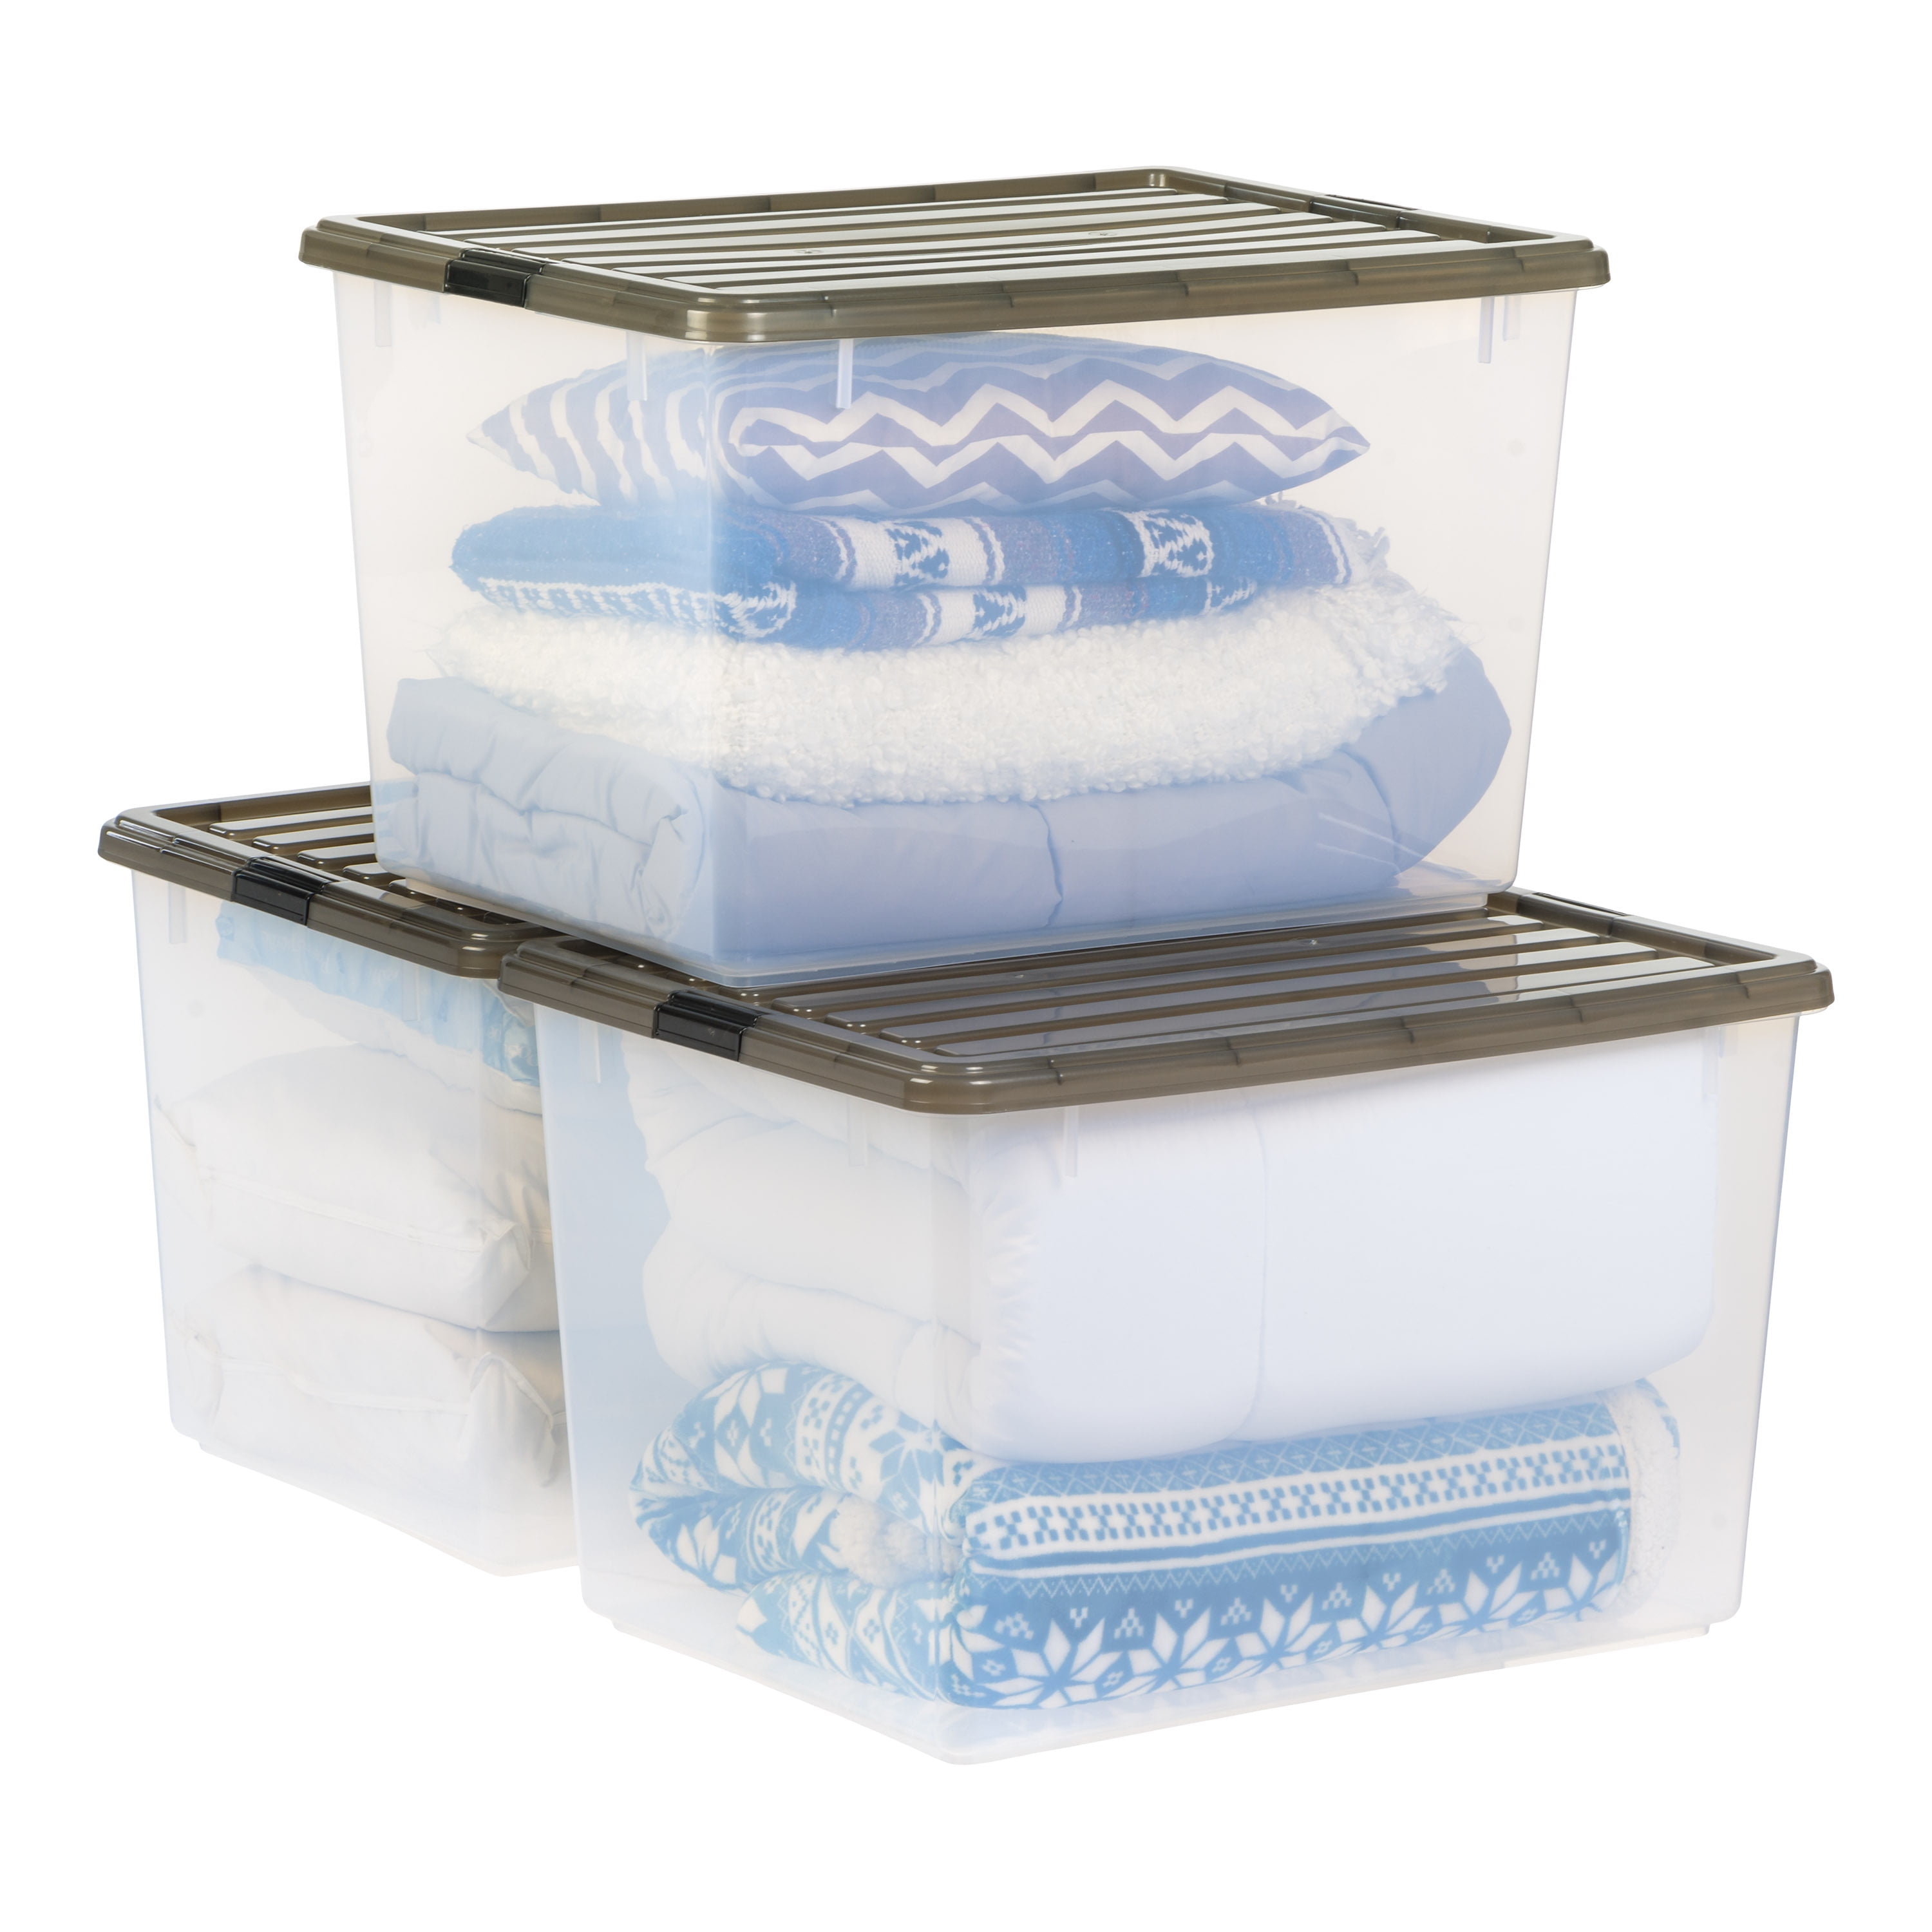 3-PACK - IRIS USA 72 Qt. Plastic Storage Container Bin with Secure Lid and  Latching Buckles 66.99 - Quarter Price